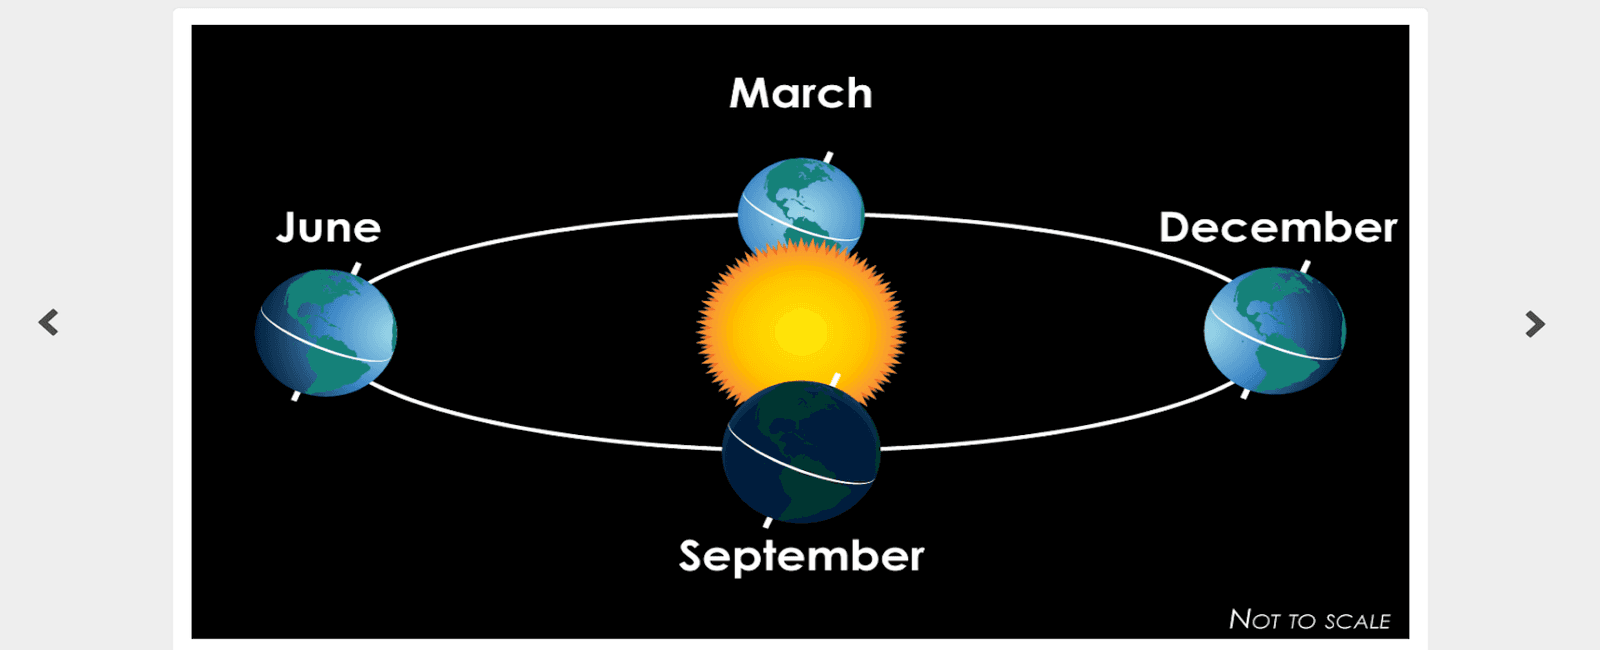 Like earth mars has seasons its shortest season is autumn which is 142 days long while spring is its longest at 194 days